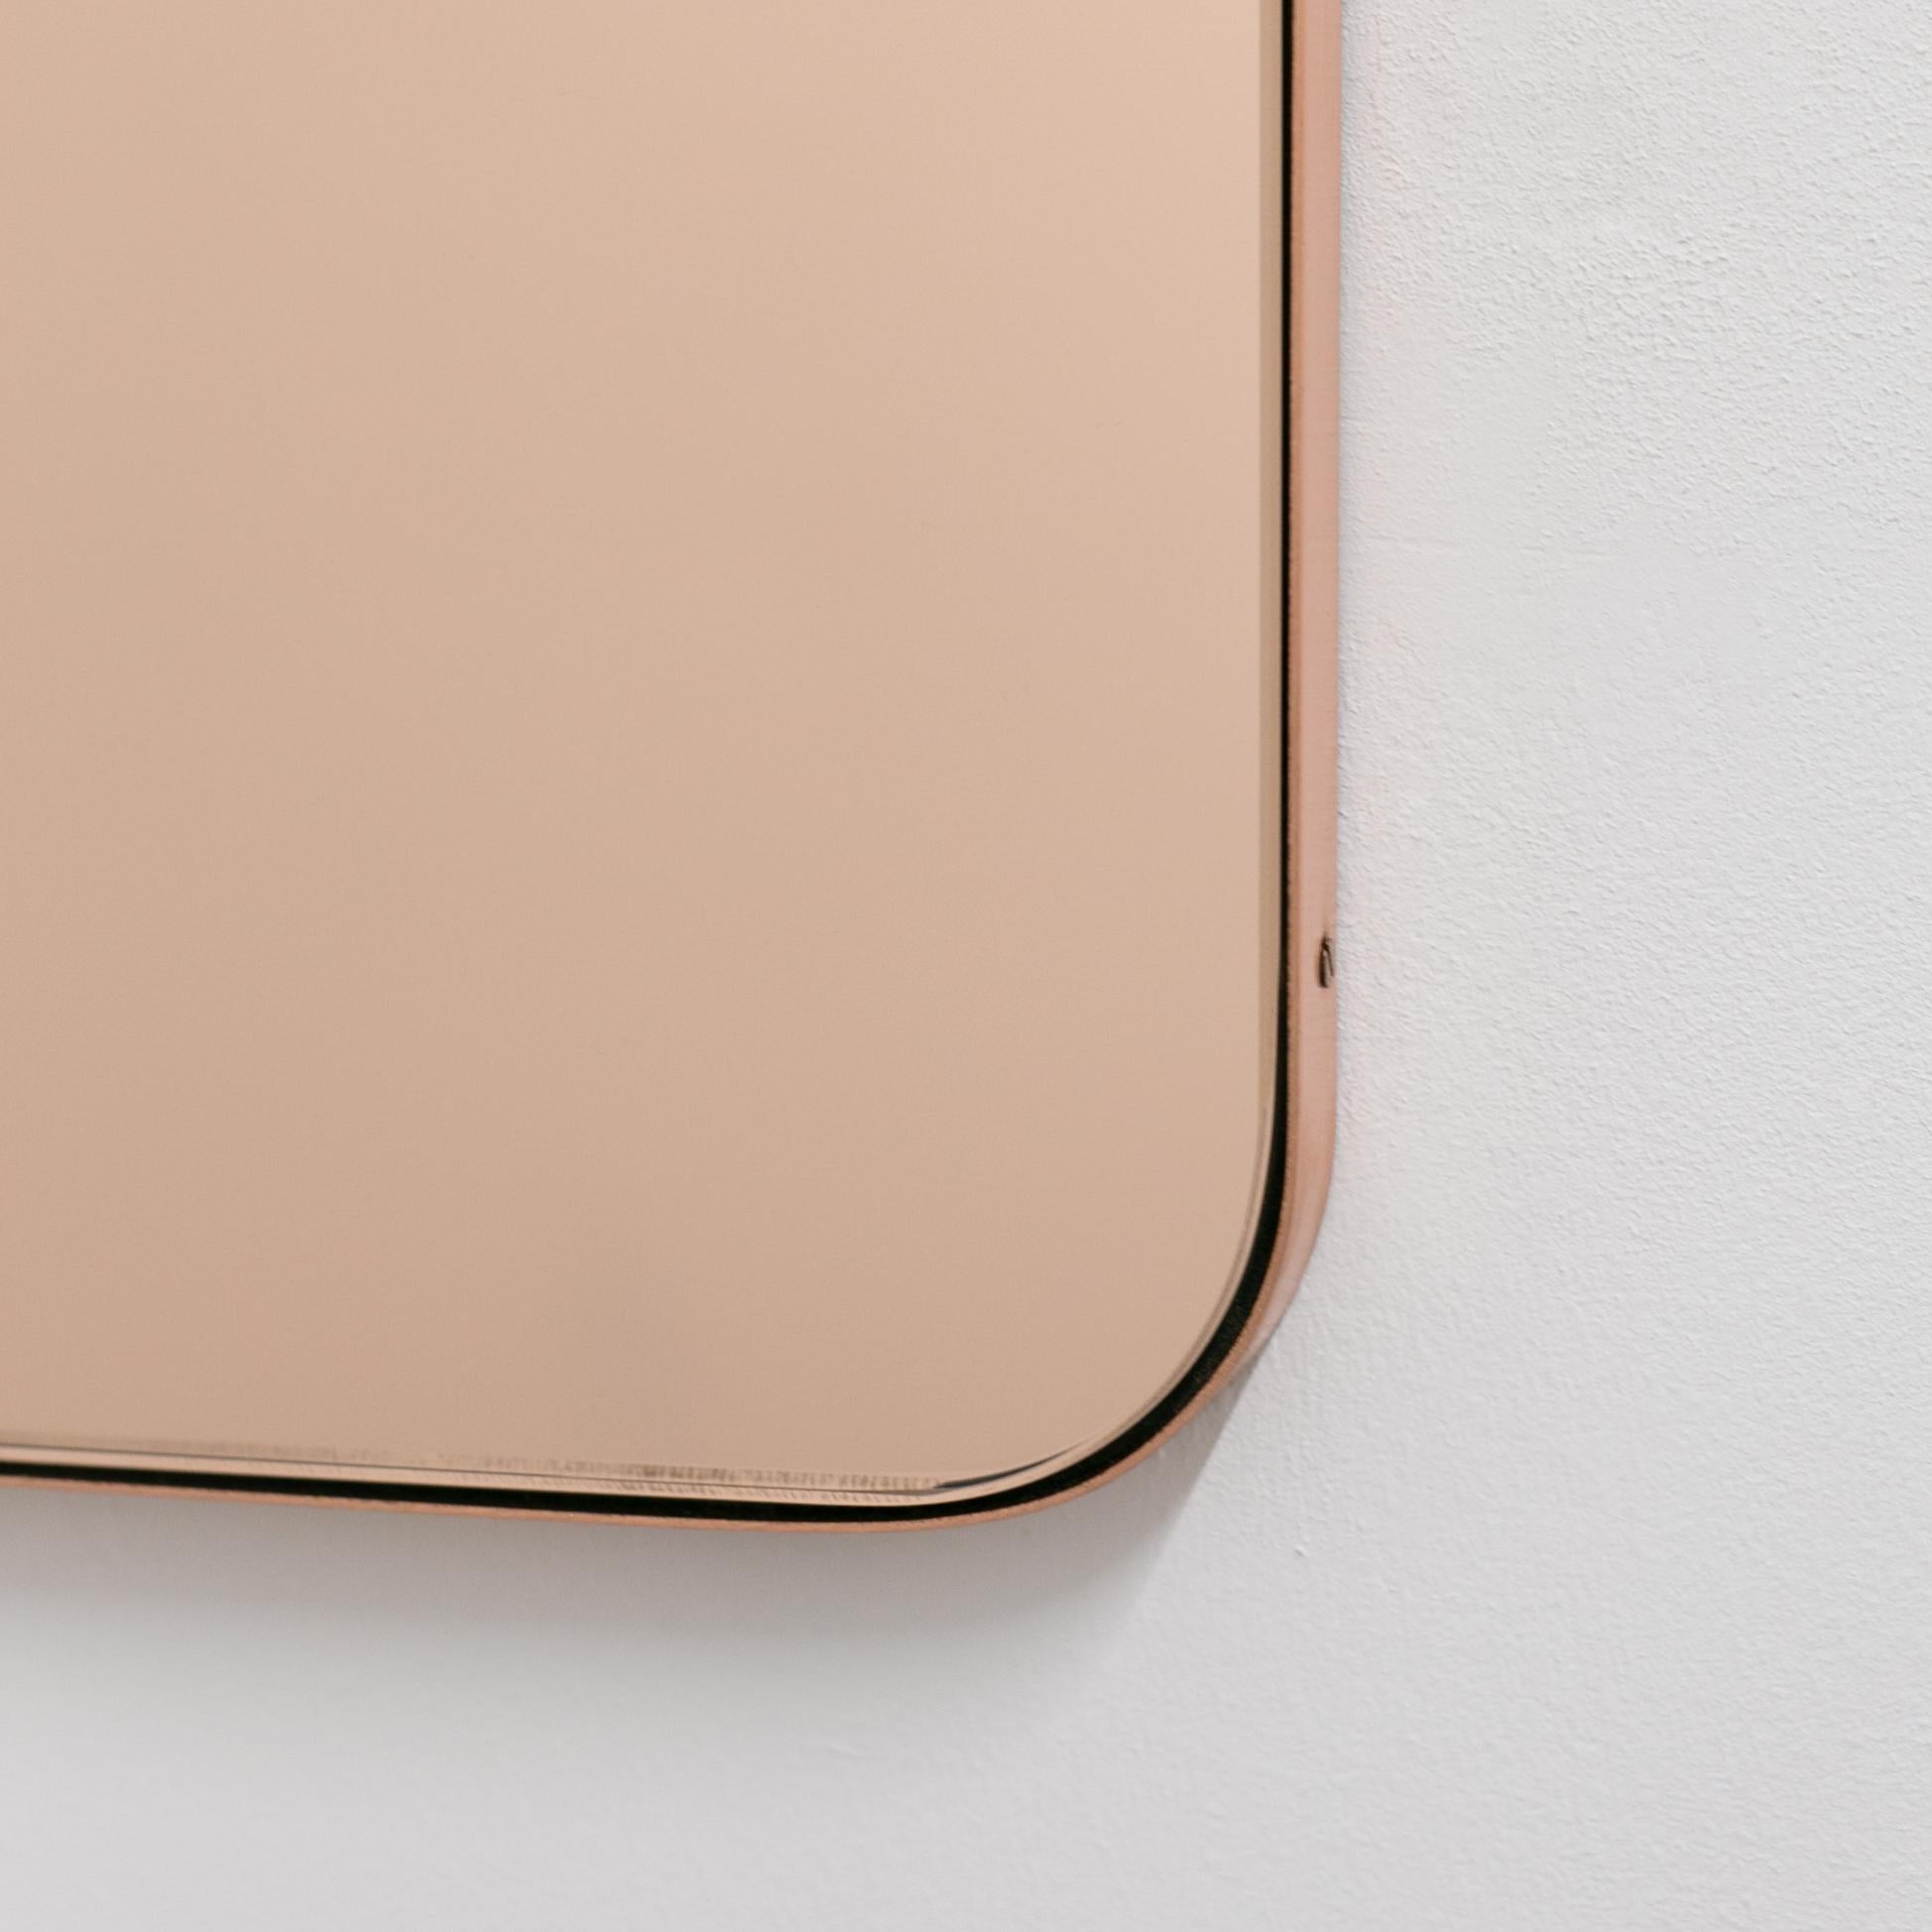 In Stock Quadris Rectangular Rose Gold Mirror, Copper Frame, Small In New Condition For Sale In London, GB